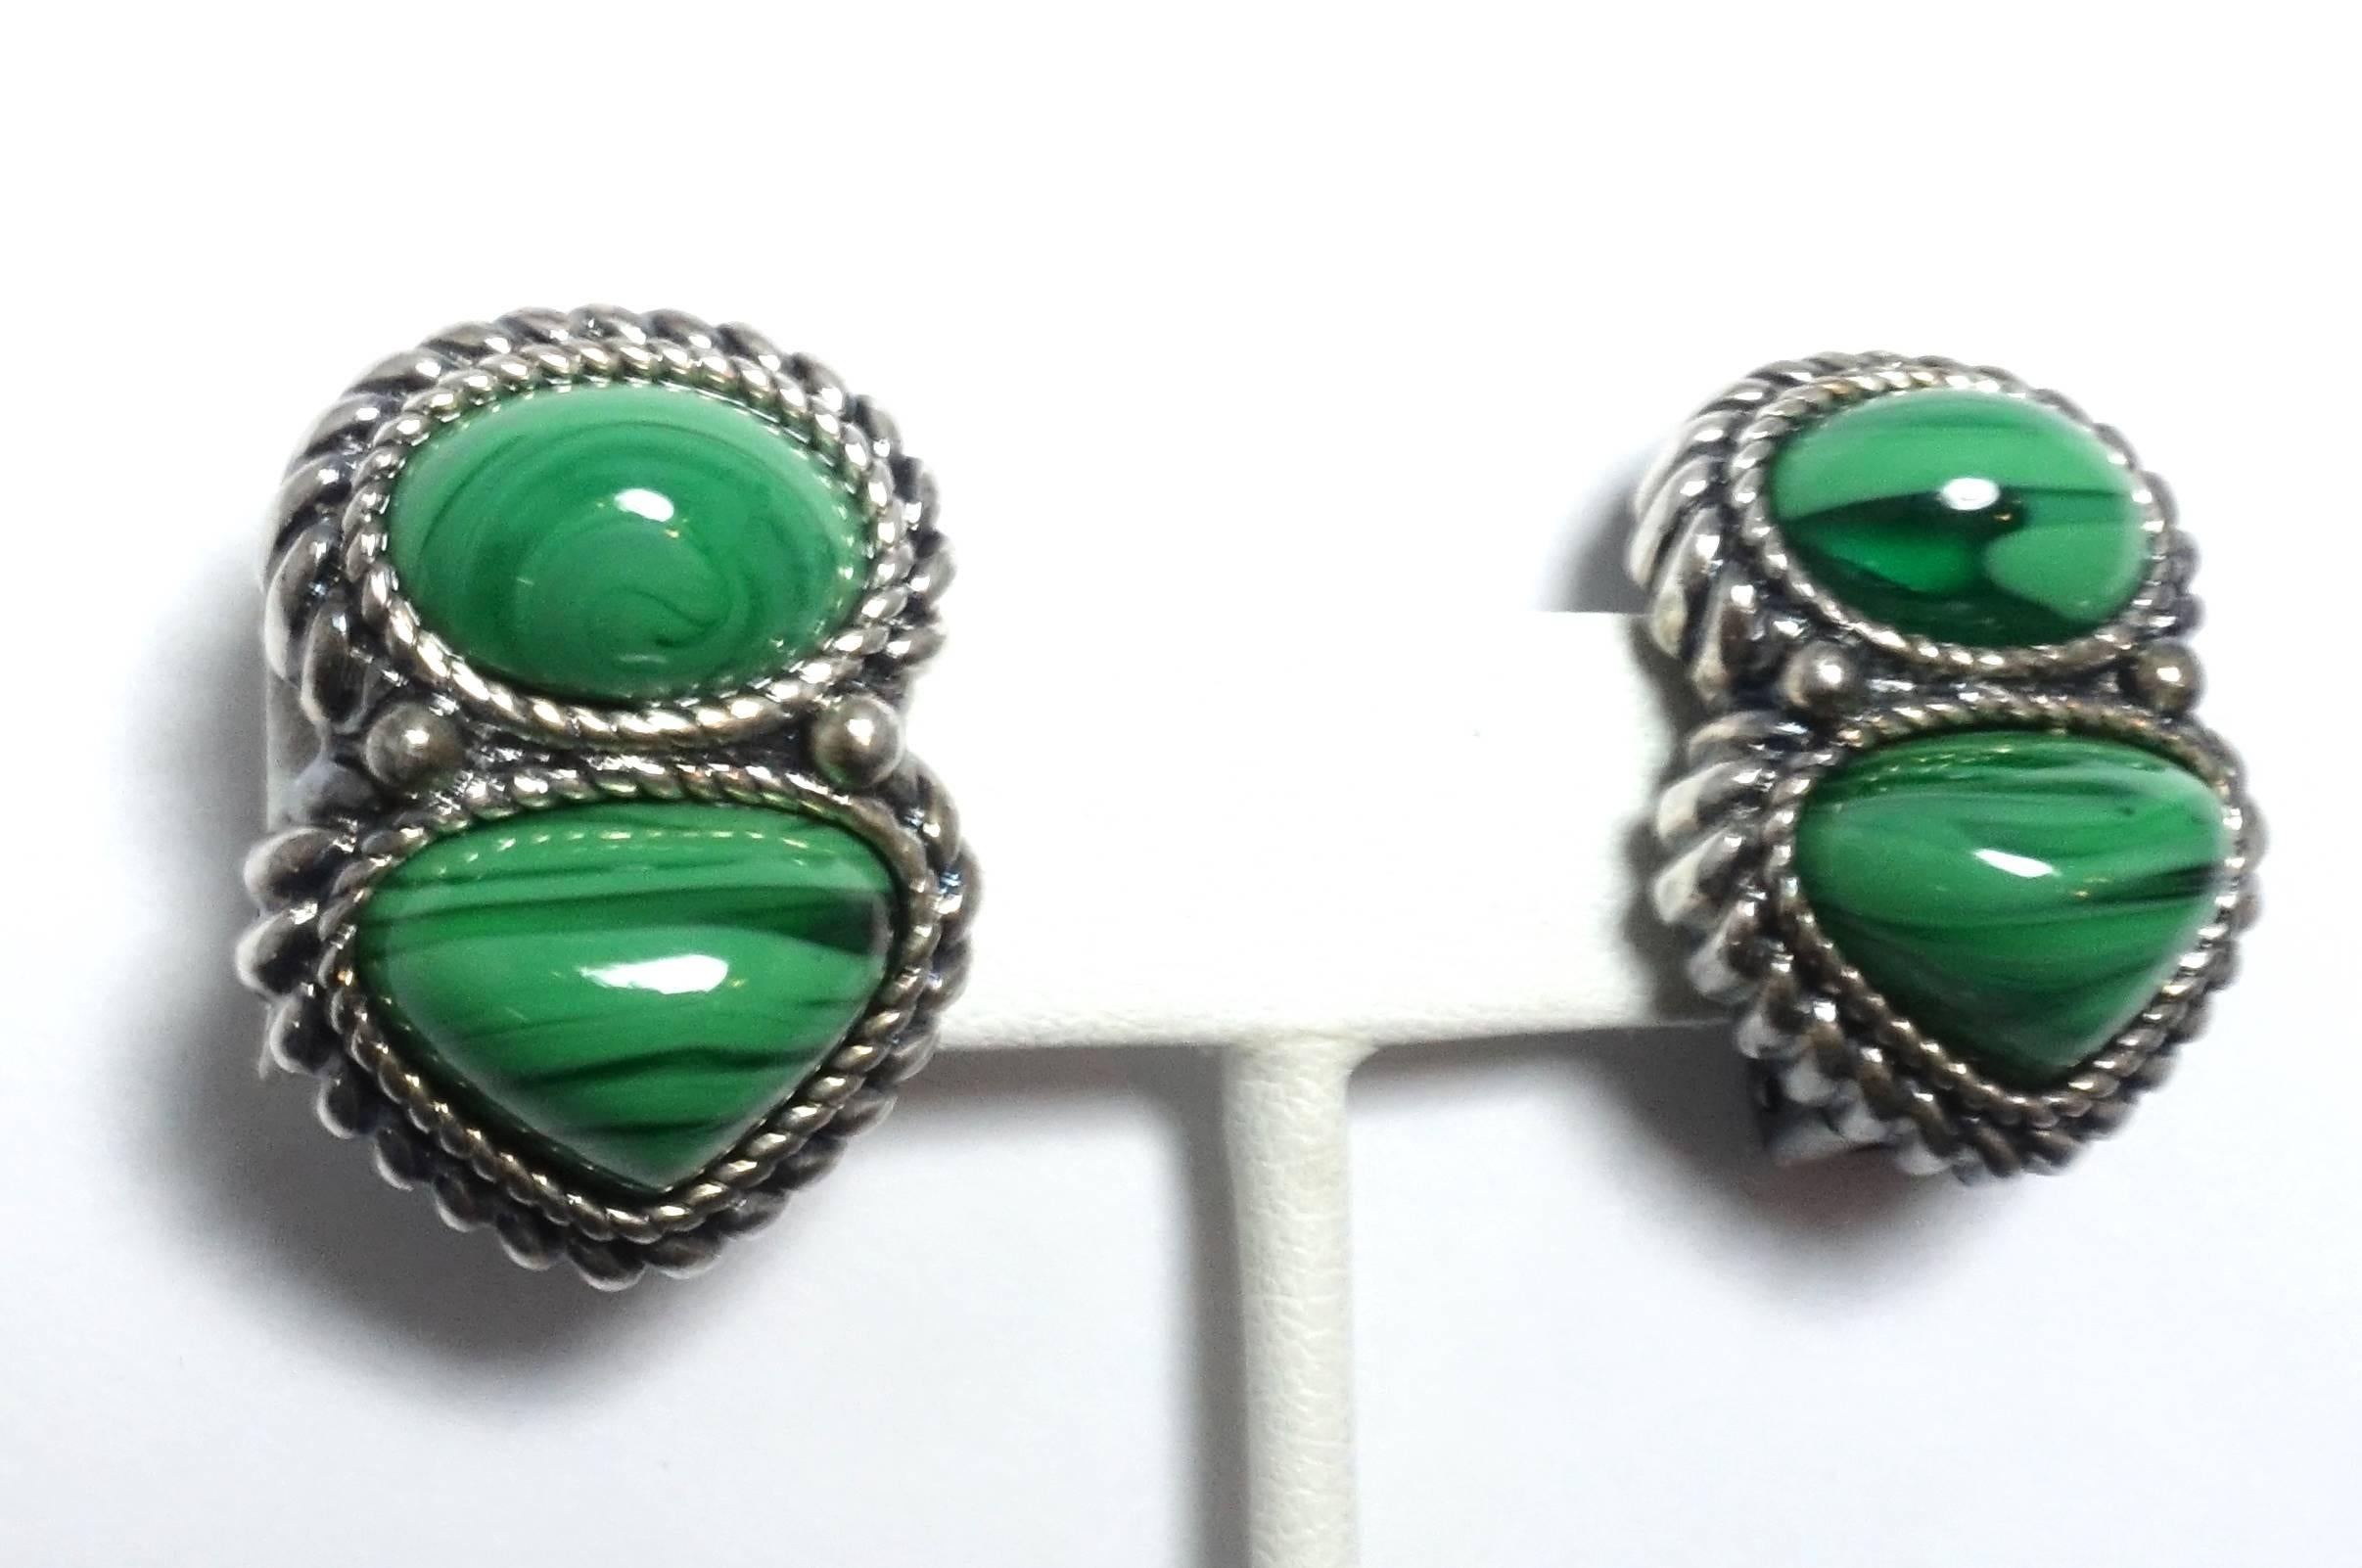 These clip earrings are in a silver tone metal setting with two faux malachite stones.  They have a ribbed border and falls nicely on the ears.  They measure 1-1/8” long and 7/8” wide.  They are signed “David Grau” and in excellent condition.